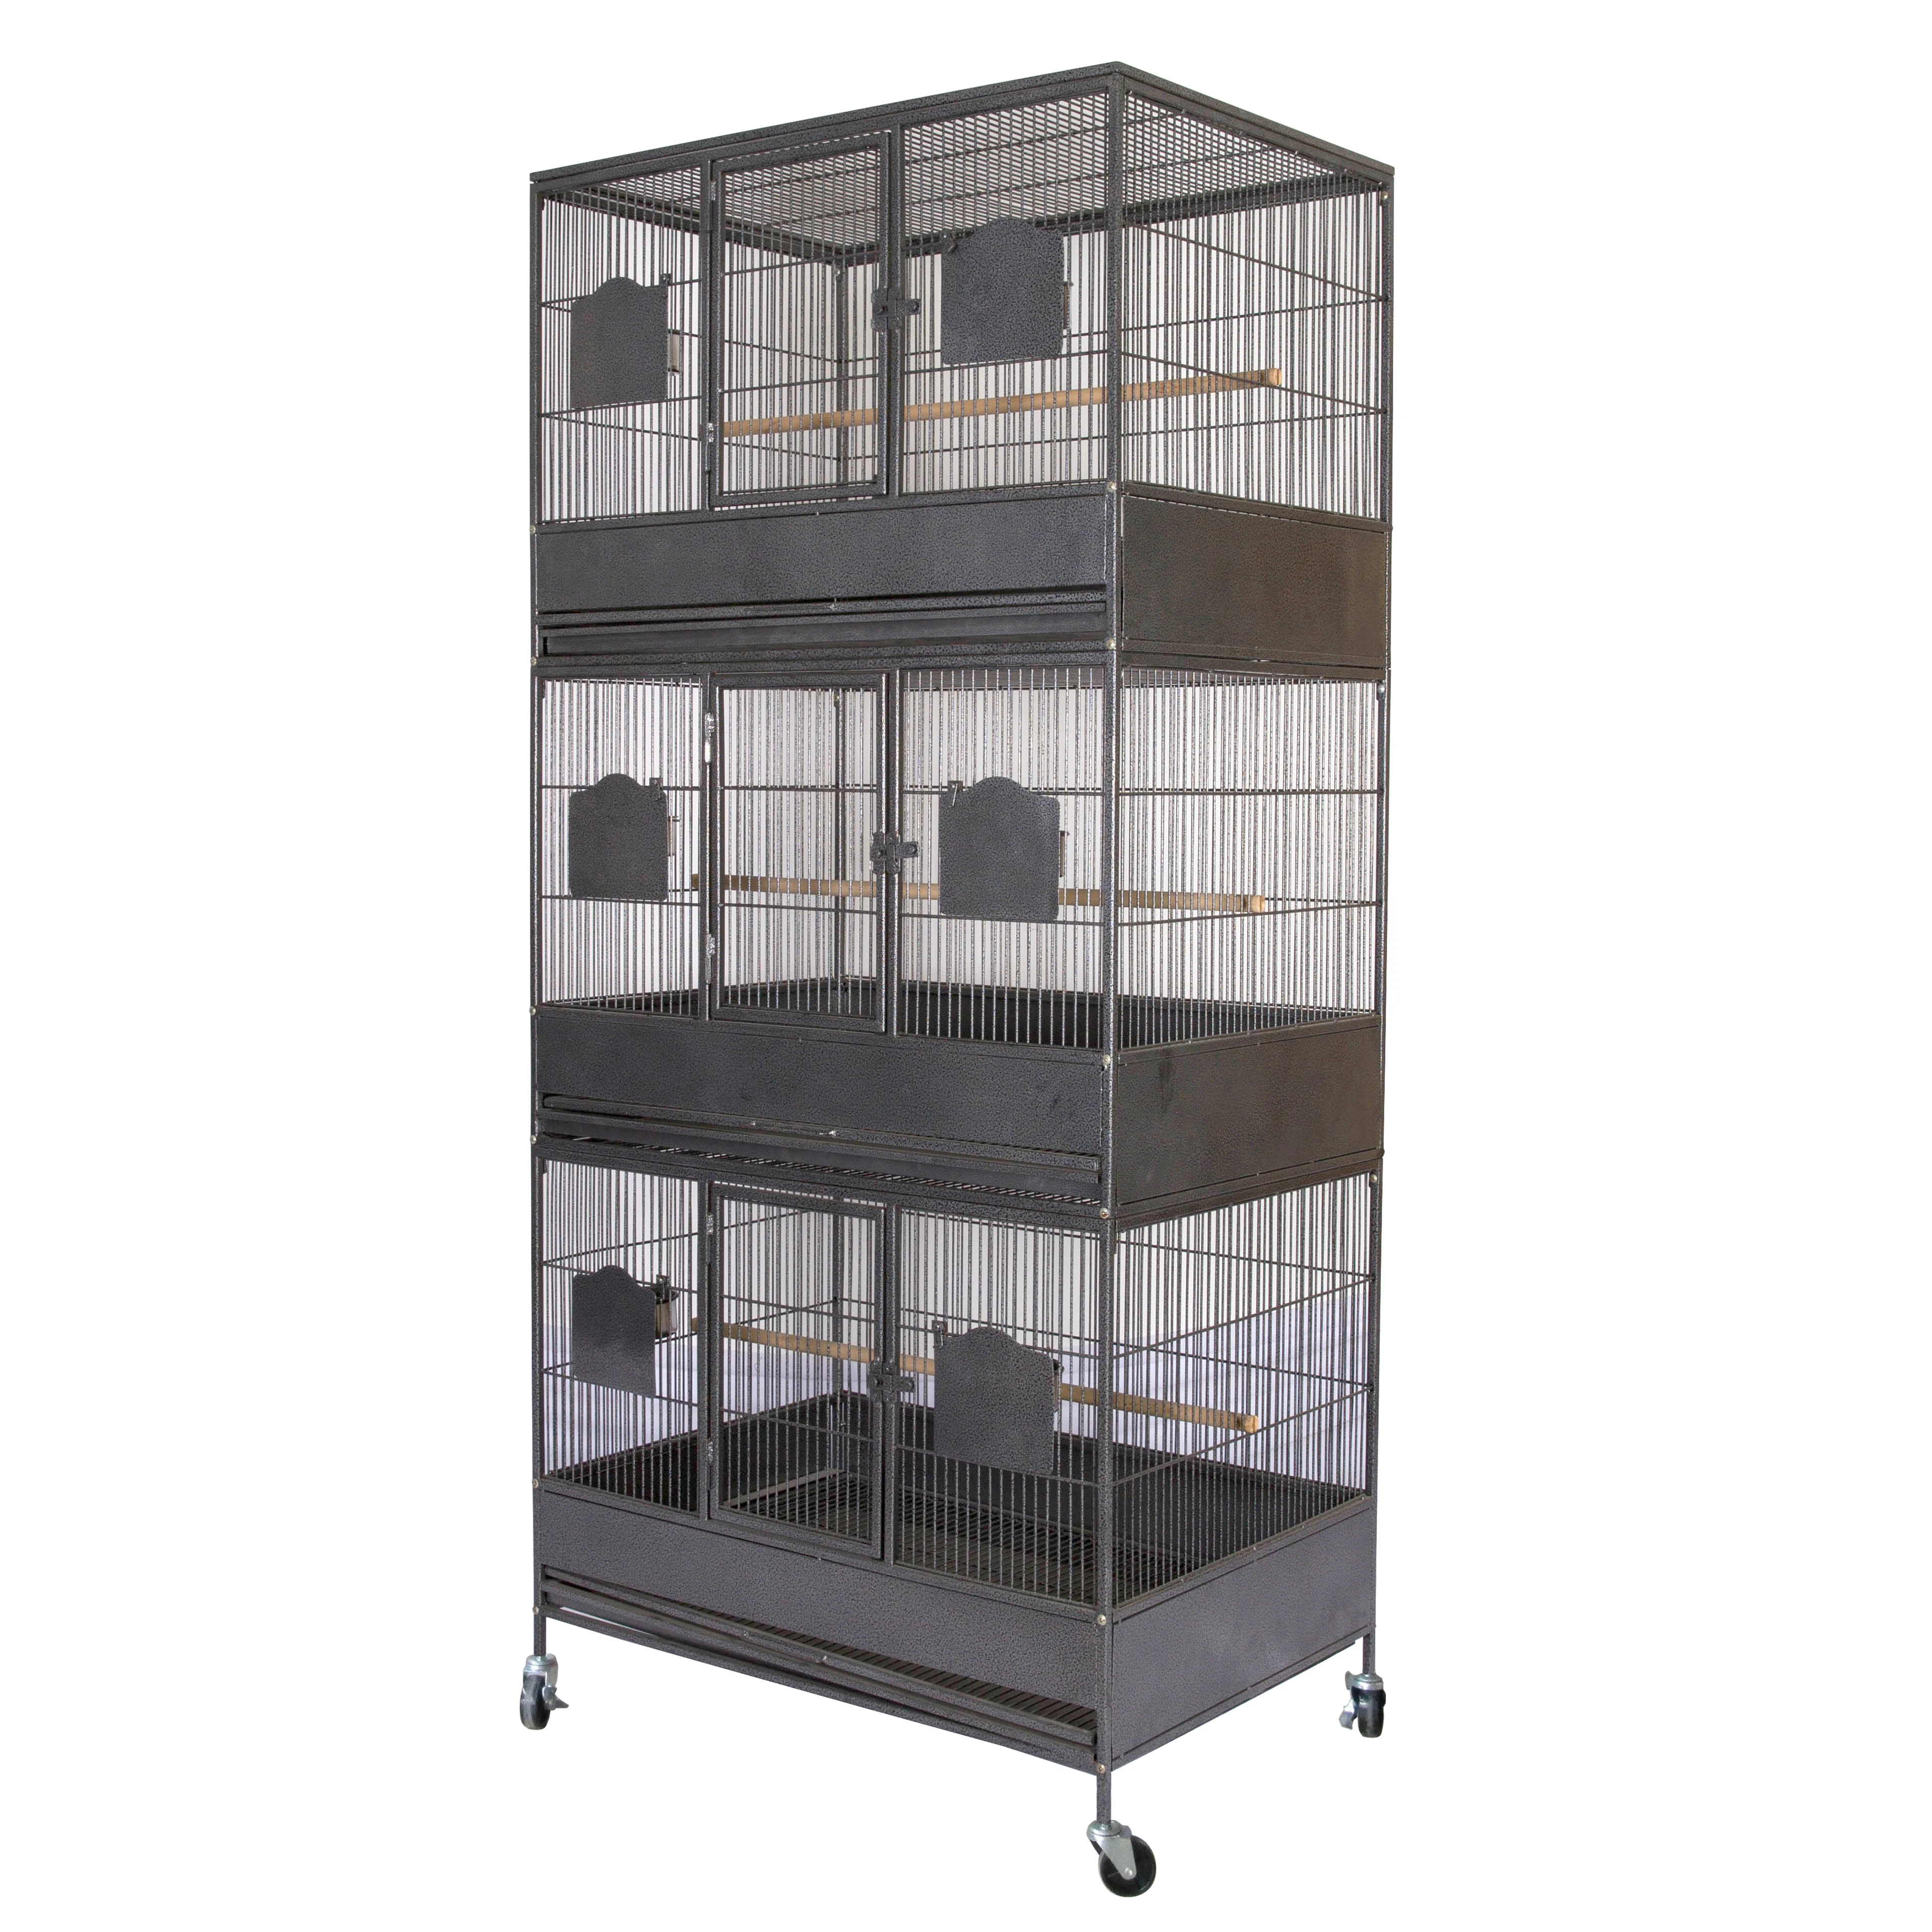 New Large Triple Stackers Wrought Iron Breeding Breeder Parrot Aviary Bird Cage Buy Breeding 